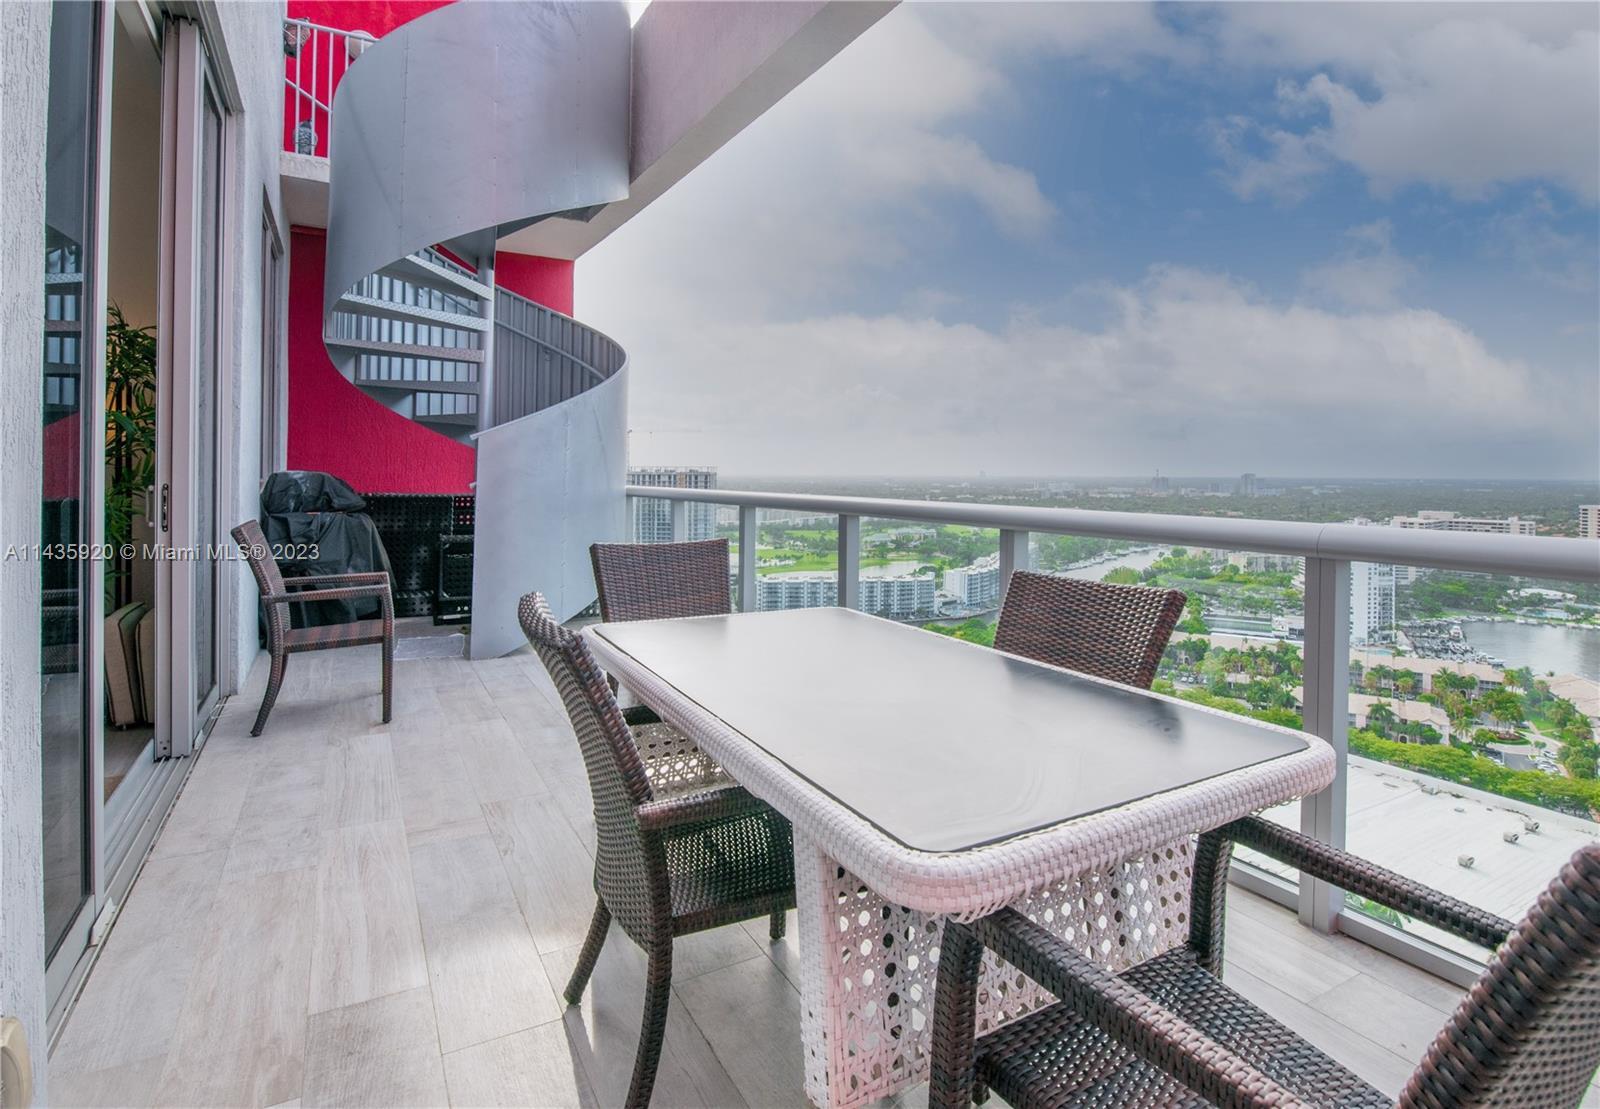 Turnkey investment property -- A beautifully furnished luxury penthouse boasting expansive views of 